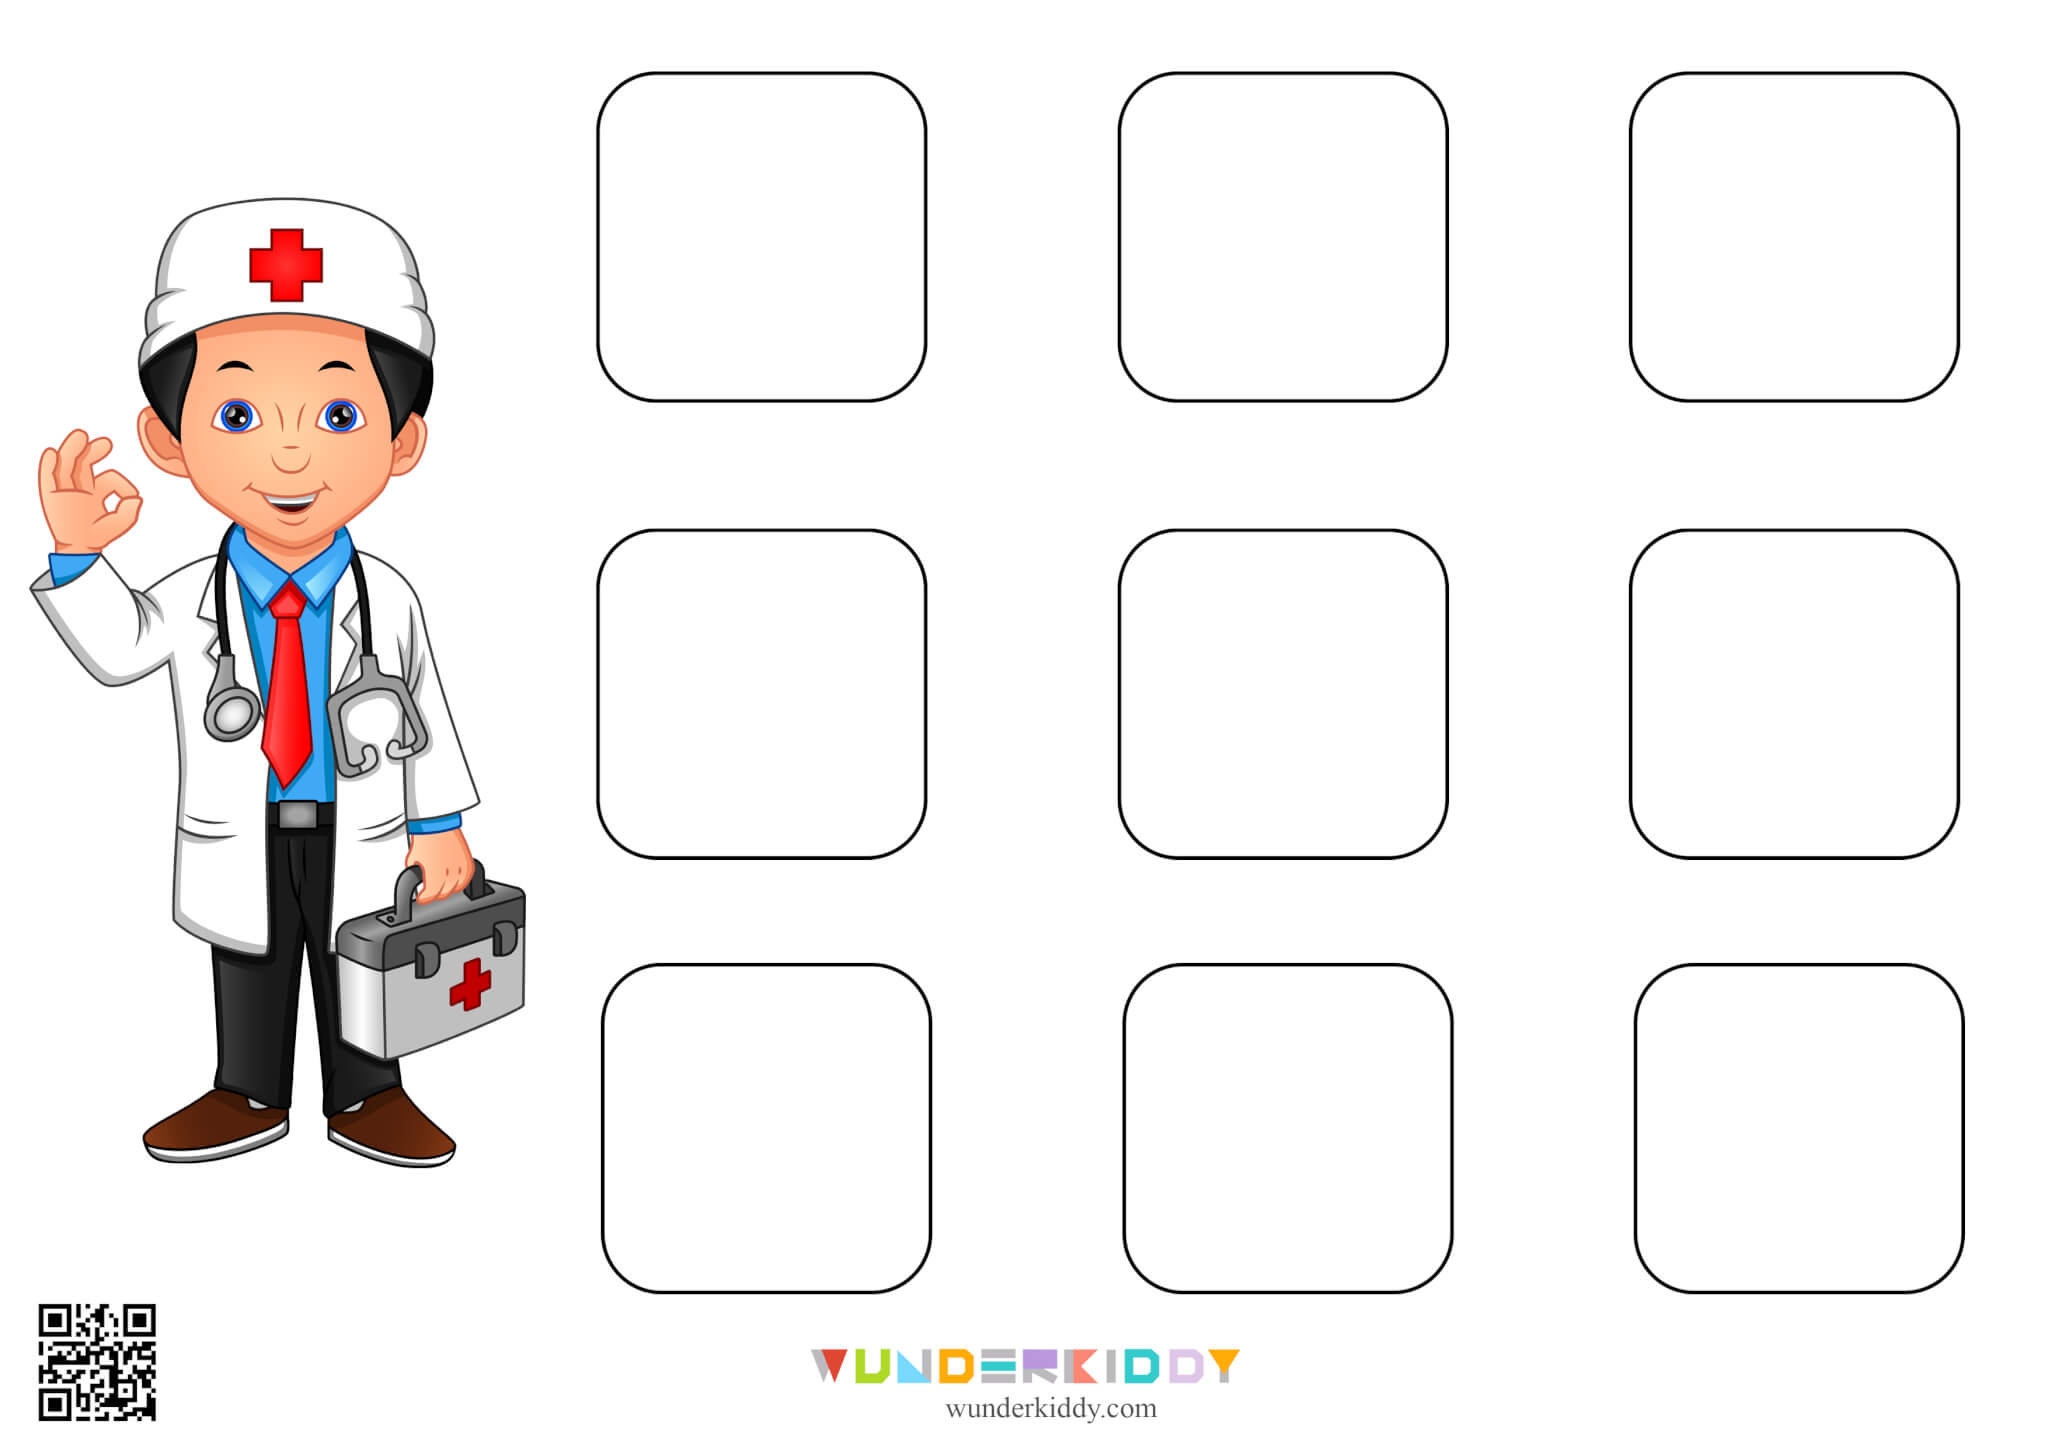 Sorting Worksheet Professions and Tools - Image 13